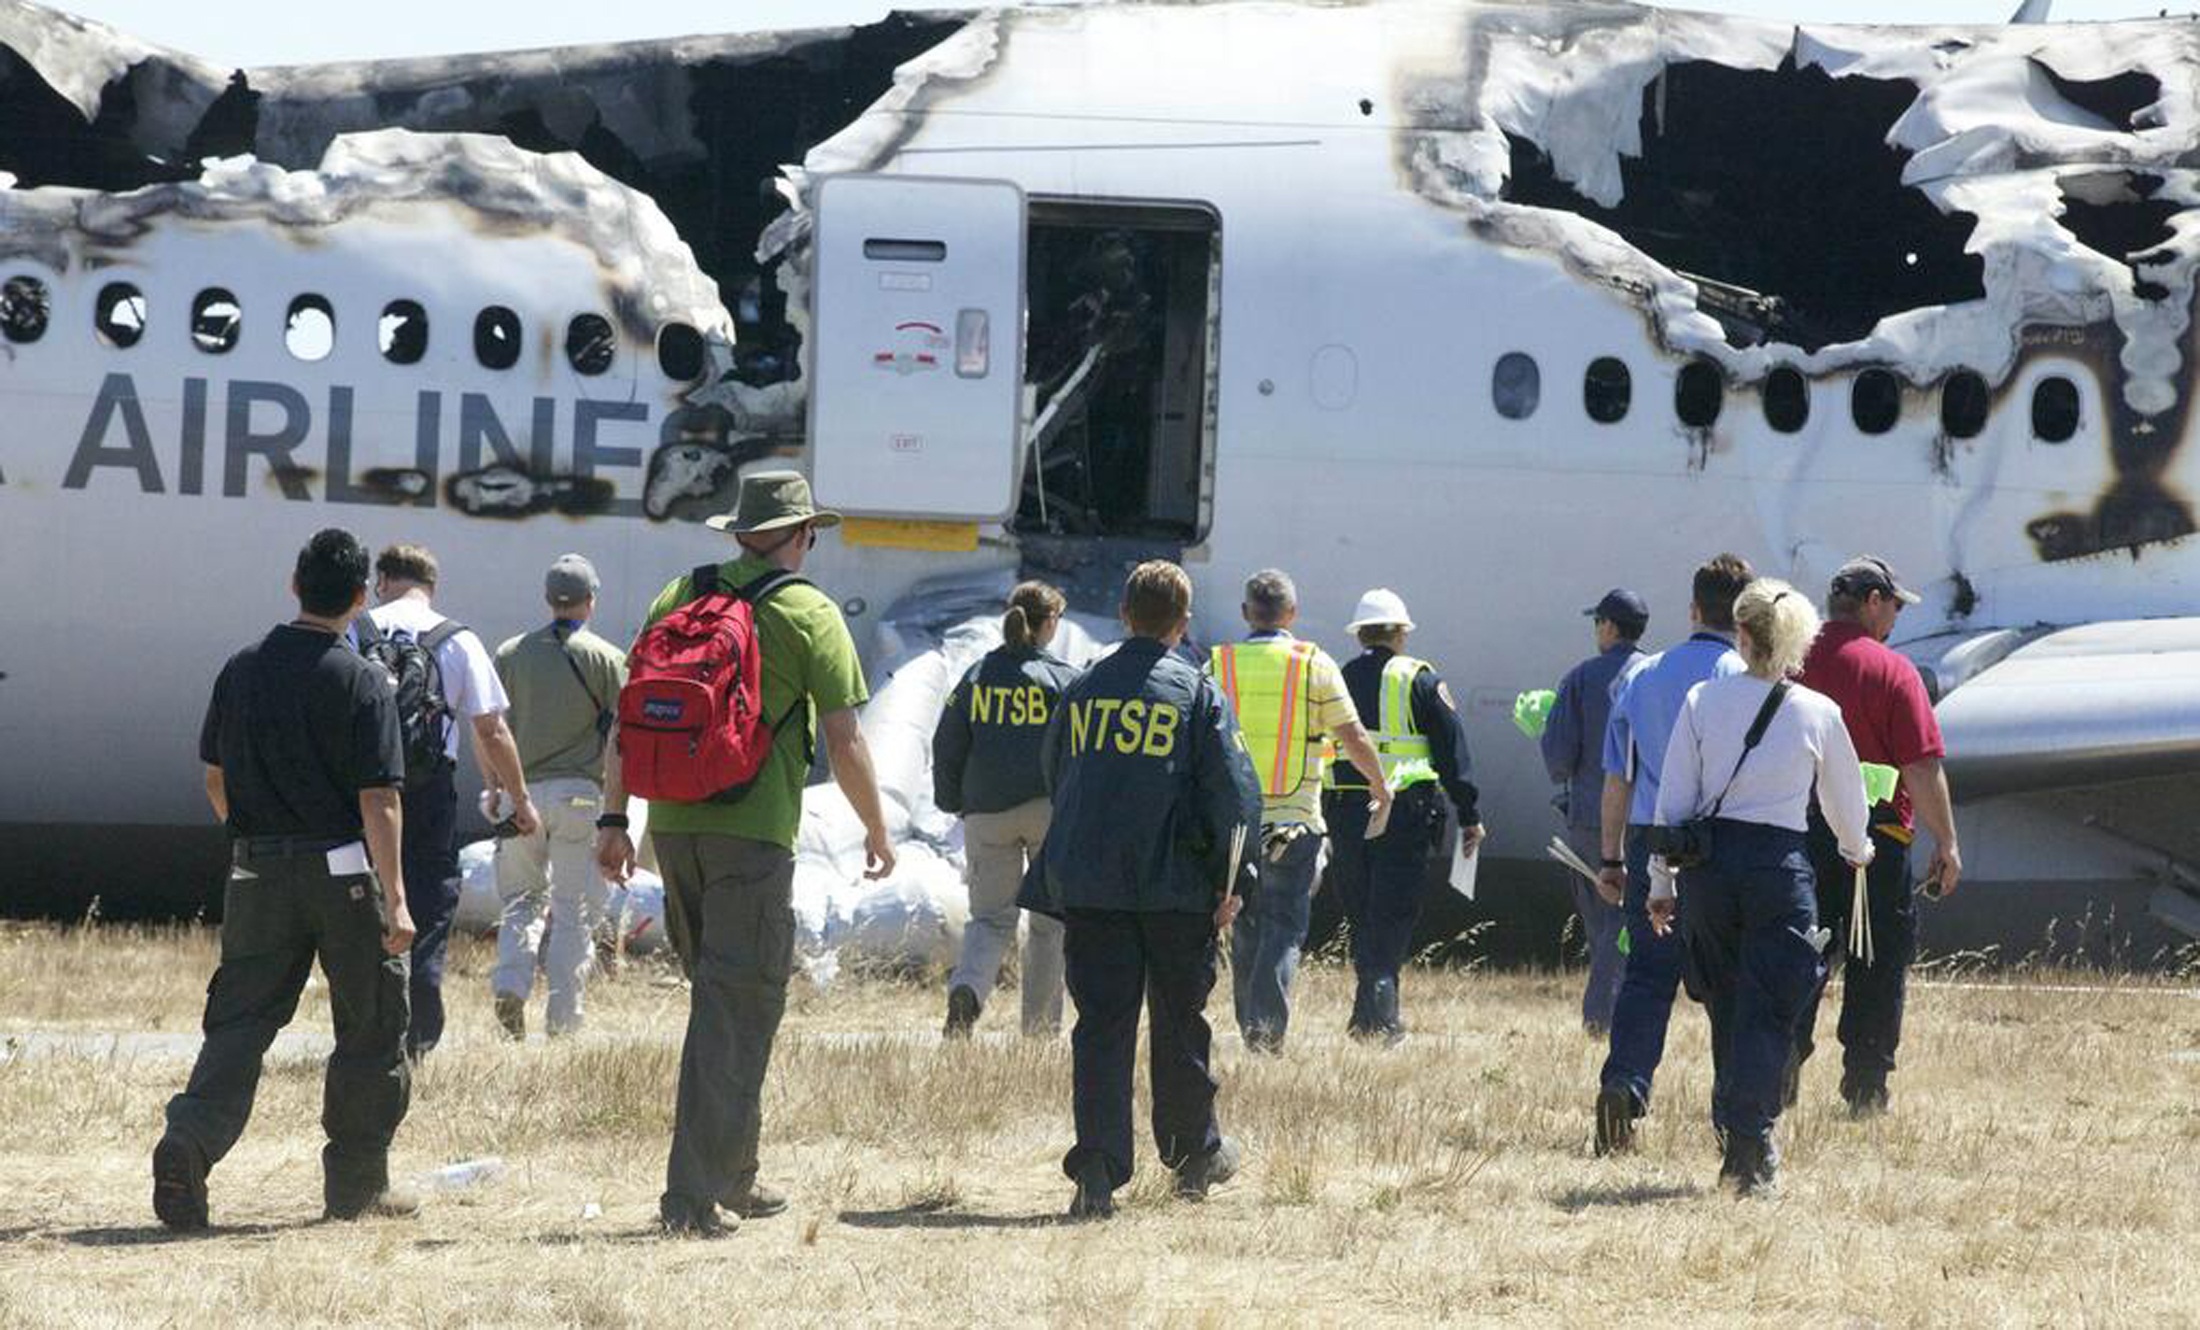 NTSB investigators at the scene of the Asiana Airlines Flight 214 crash site in San Francisco. Photo: Reuters